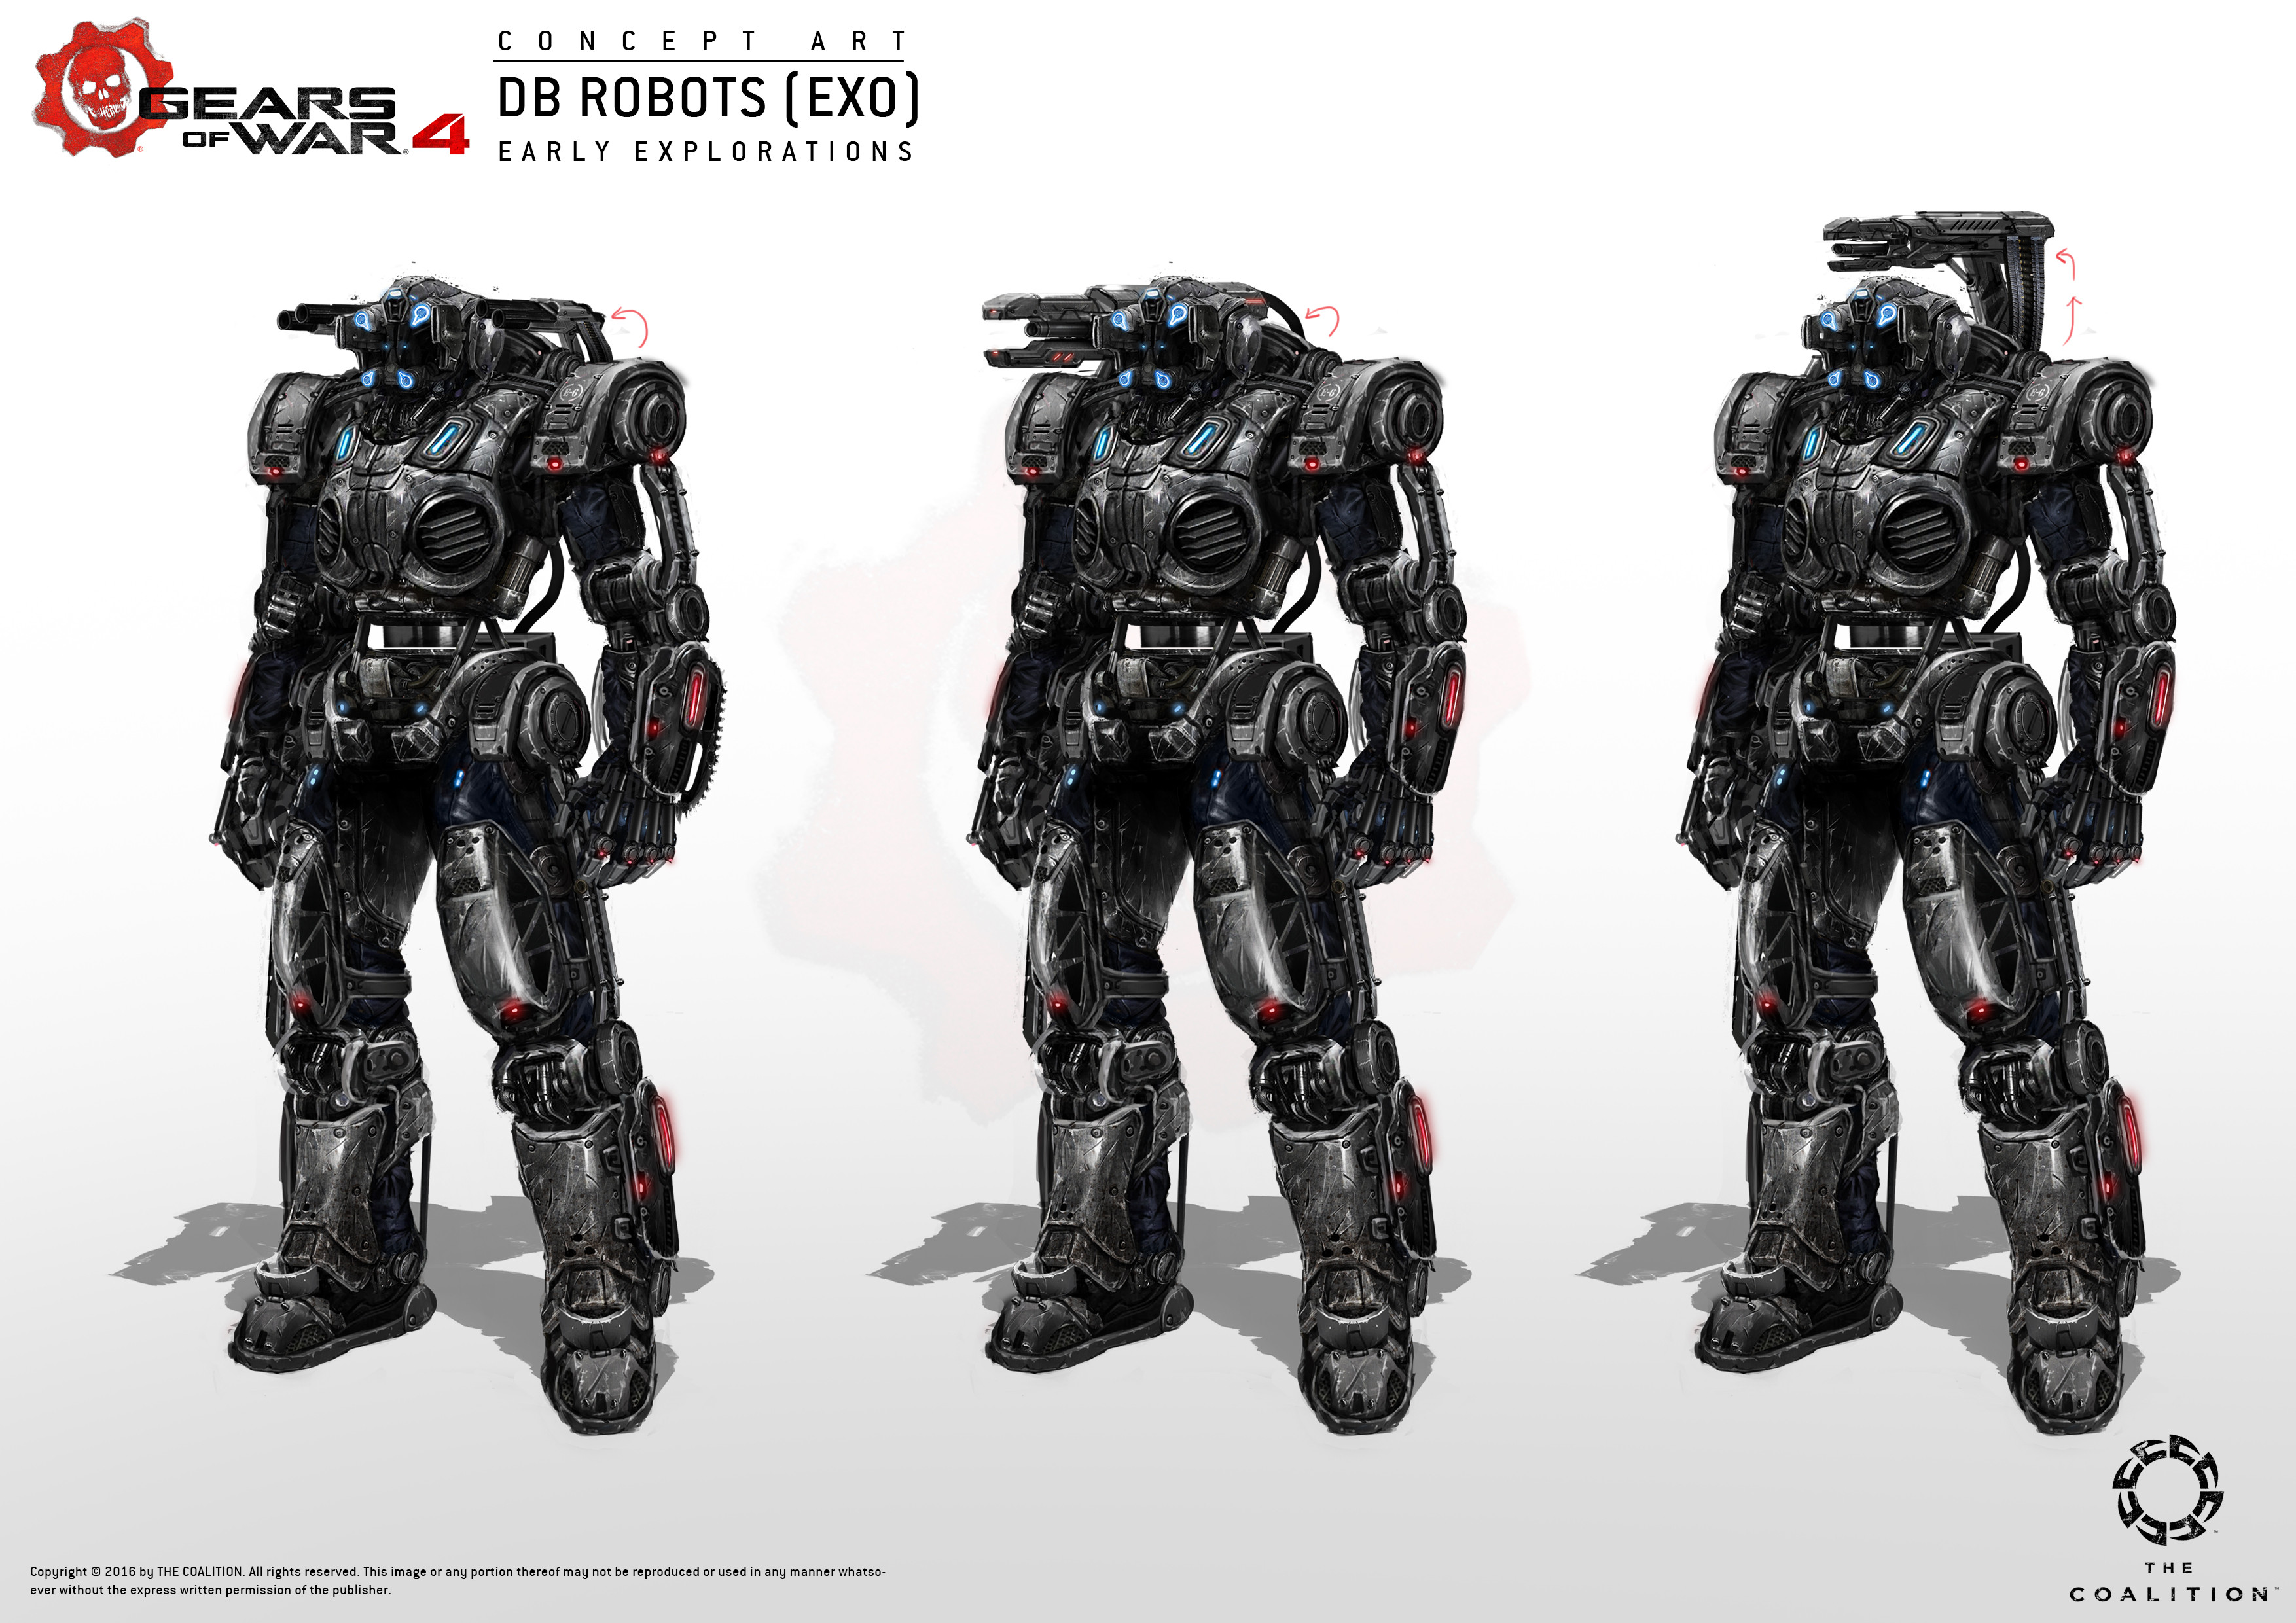 Early explorations of the exo suit